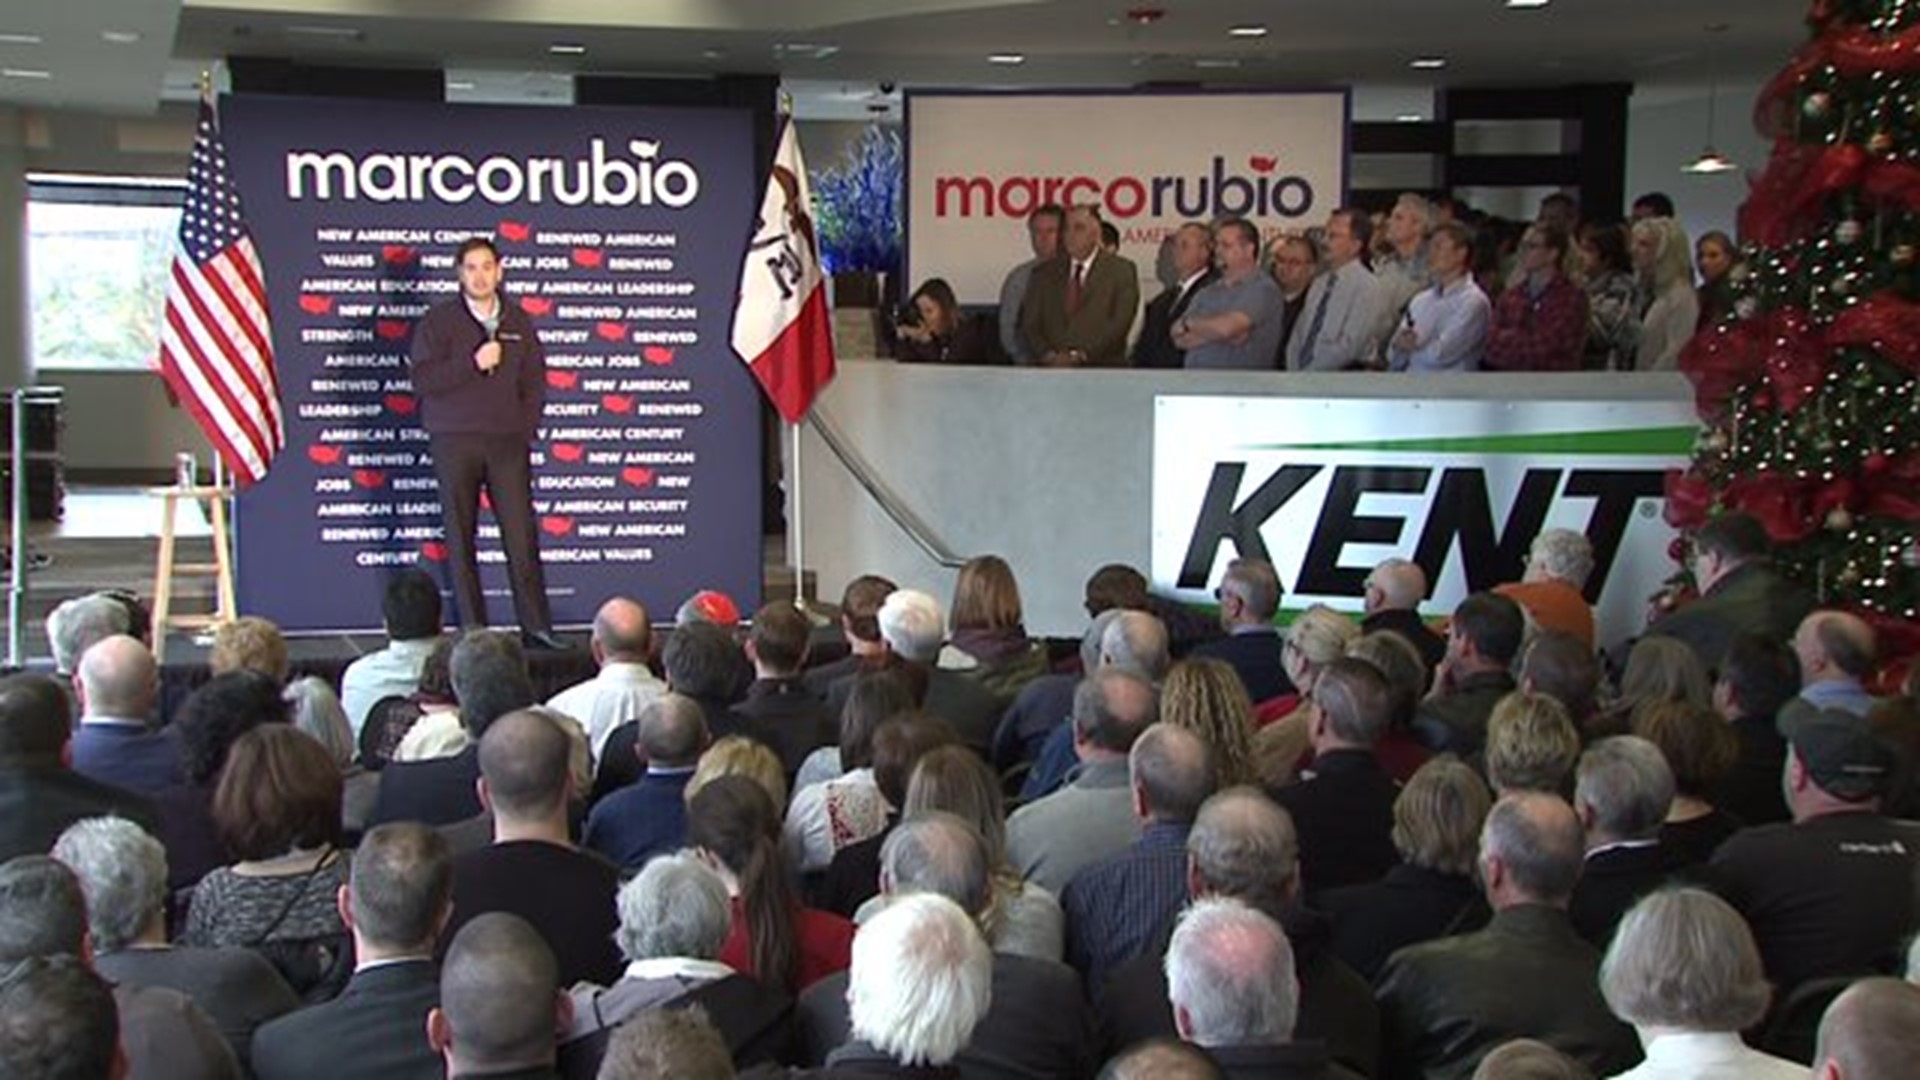 Republican candidate Marco Rubio campaigns in Muscatine